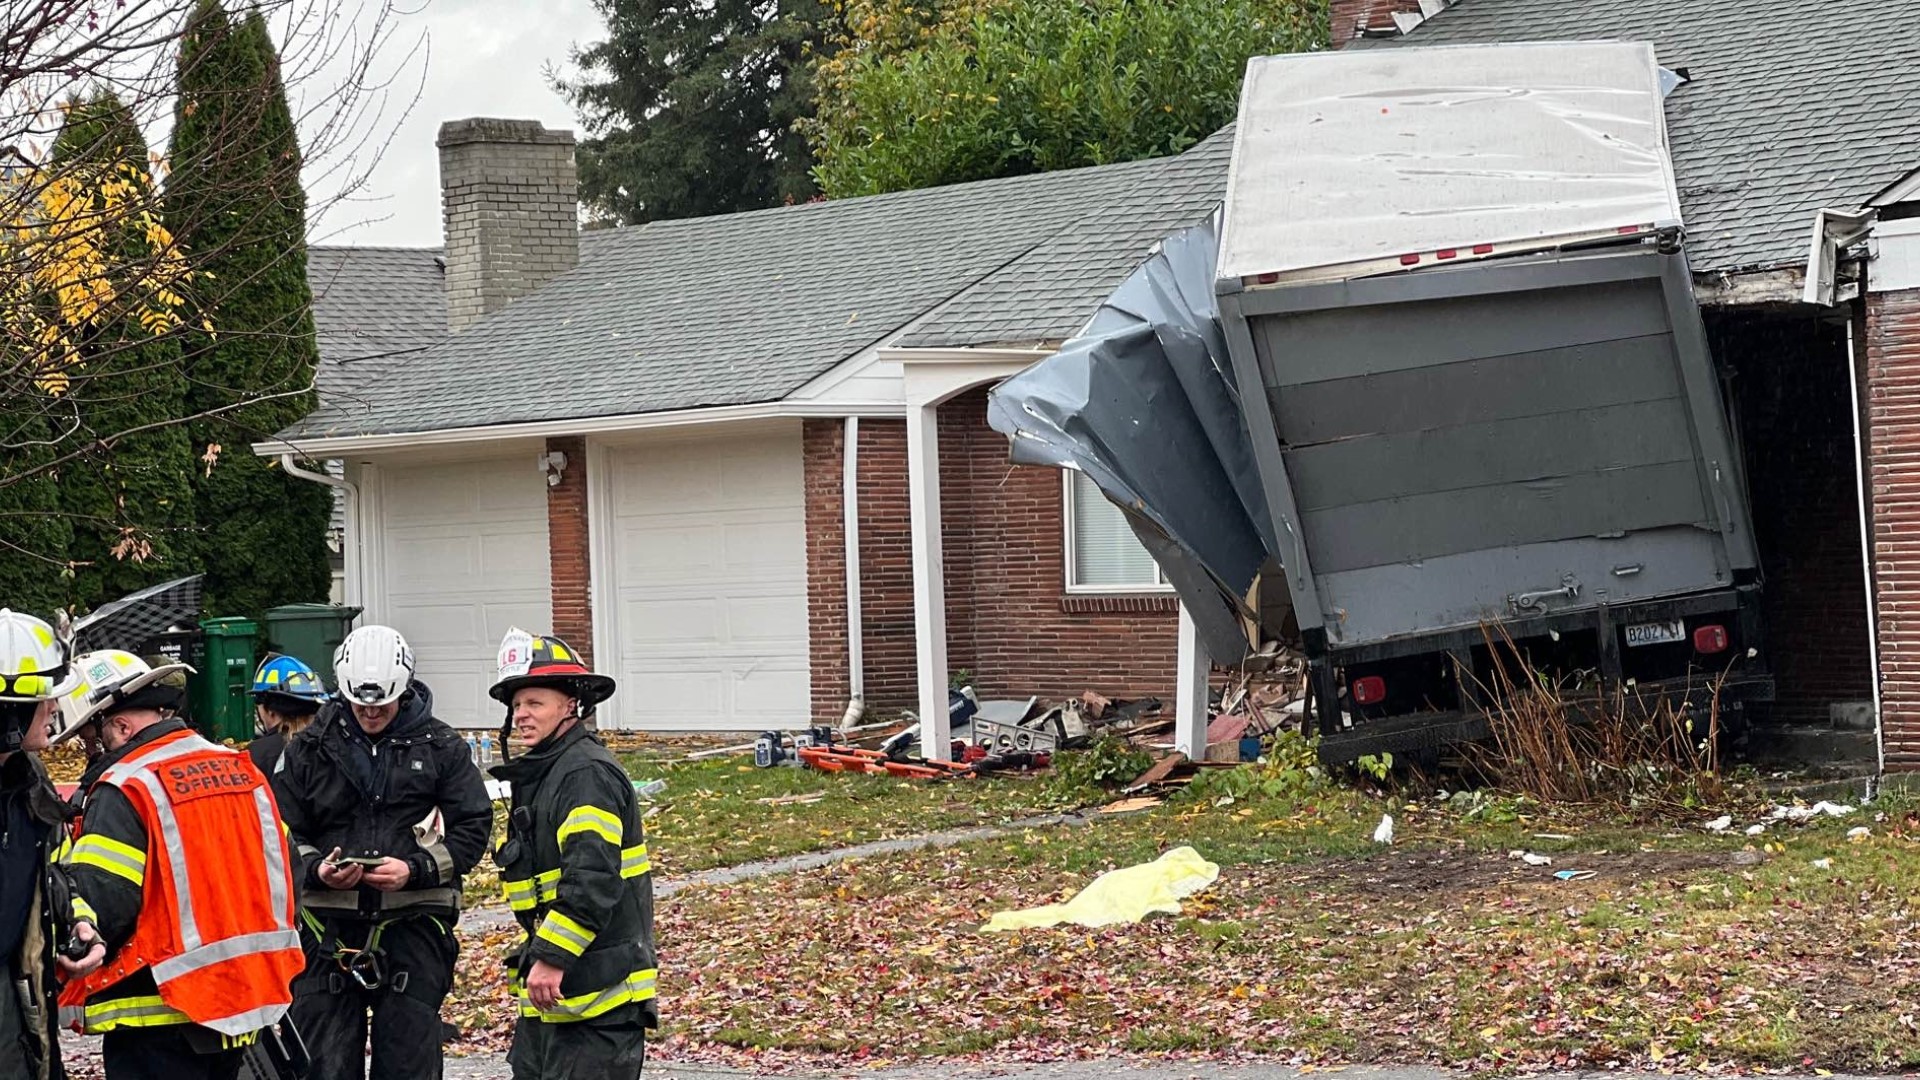 Seattle Fire said one passenger in the truck got himself out, and the driver had to be extricated.